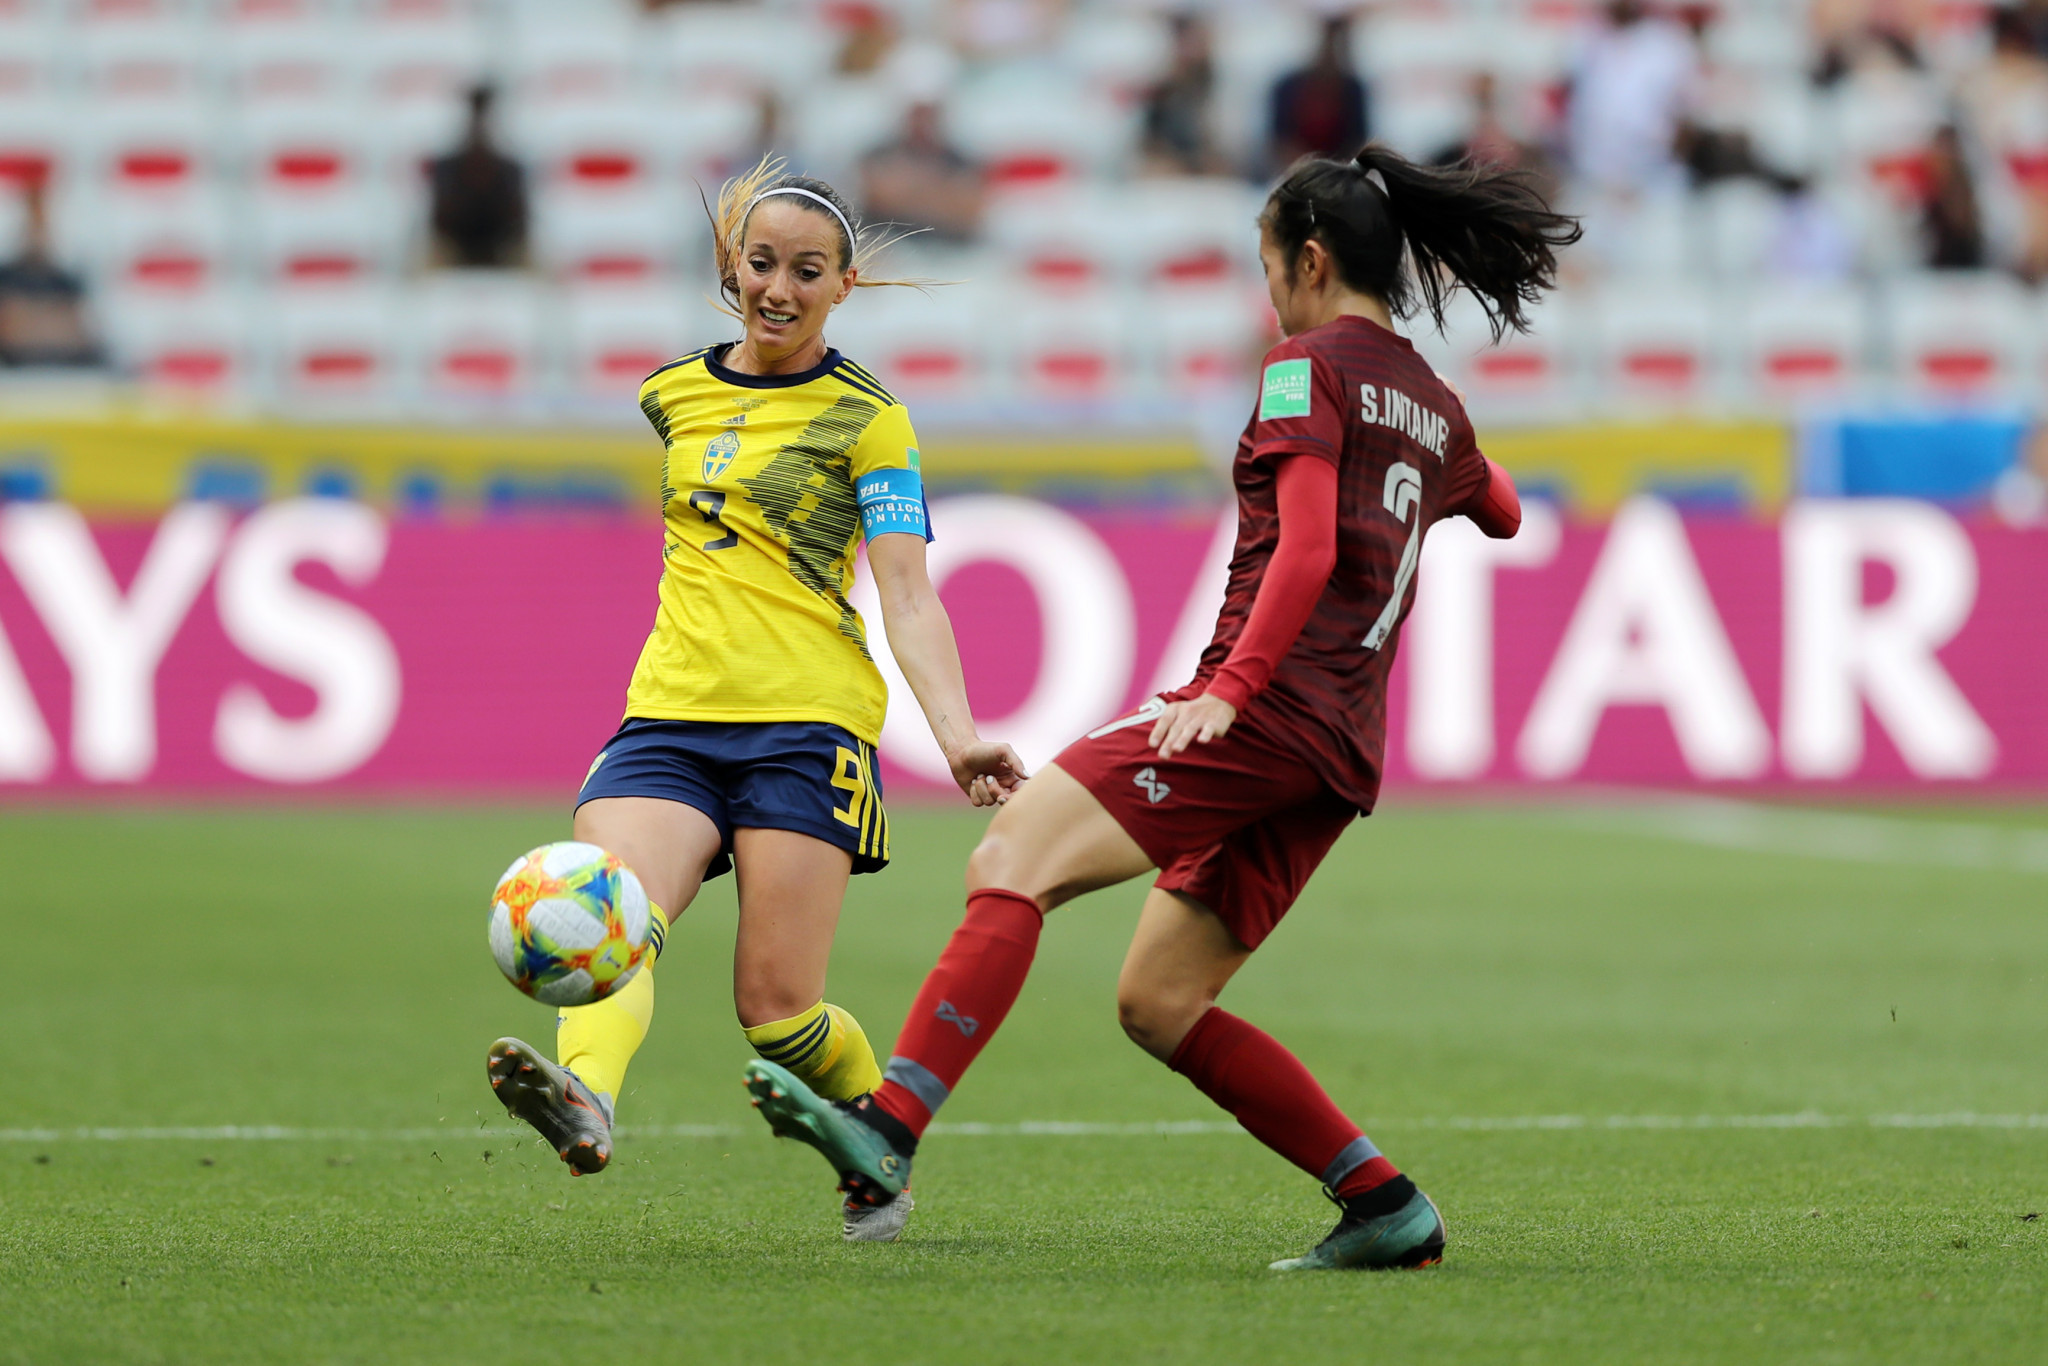 Kosovare Asllani doubled the lead at Allianz Riviera in Nice ©Getty Images